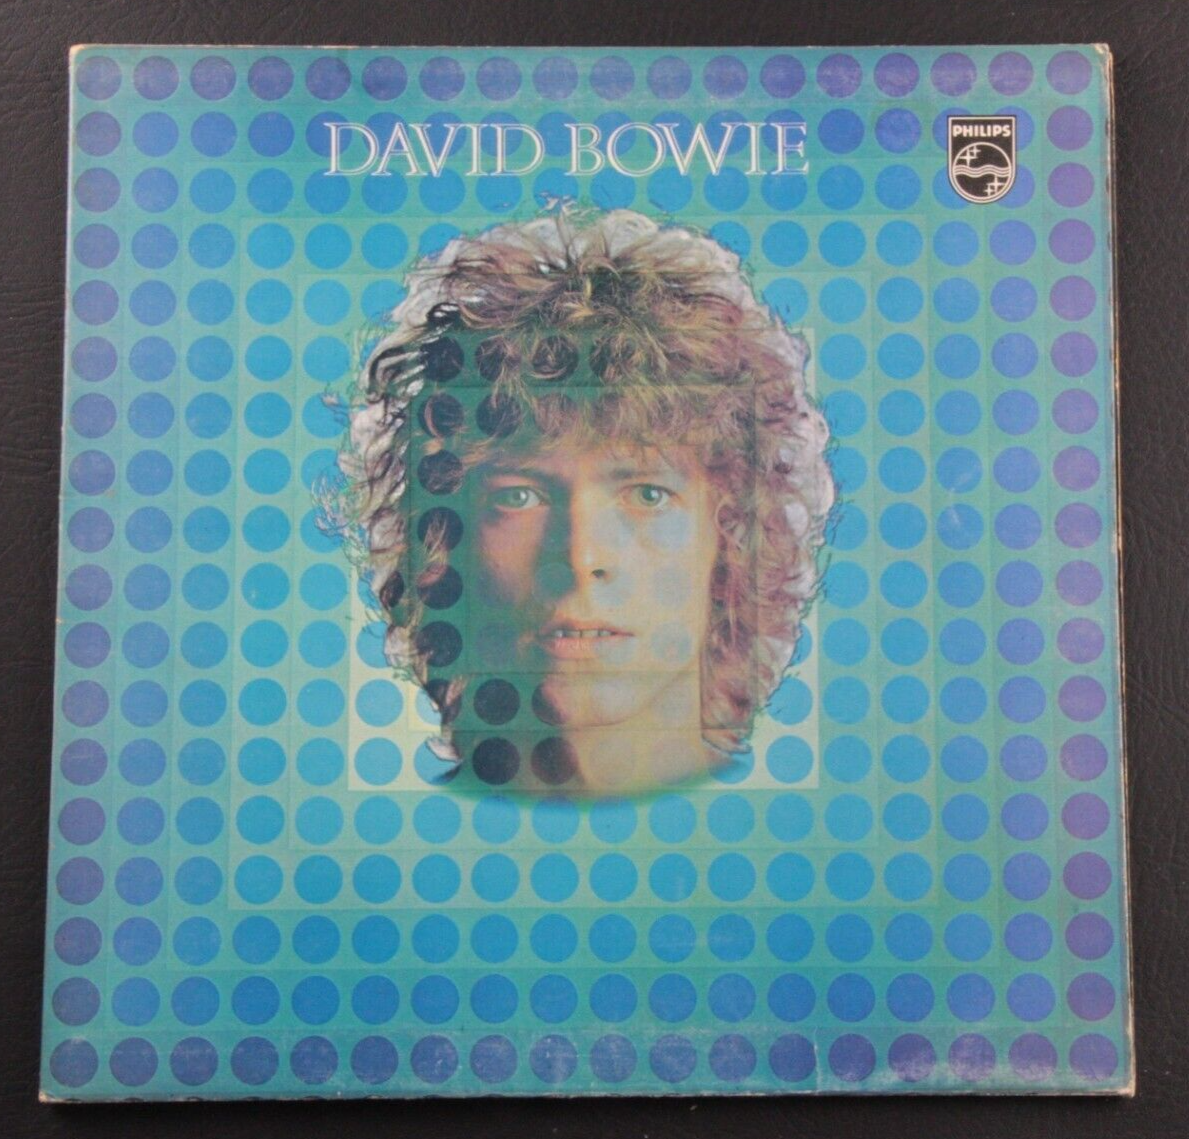 Pic 3 David Bowie, ft. Space Oddity * SUPERB MINT- CONDITION * PHILIPS UK 1st Press *